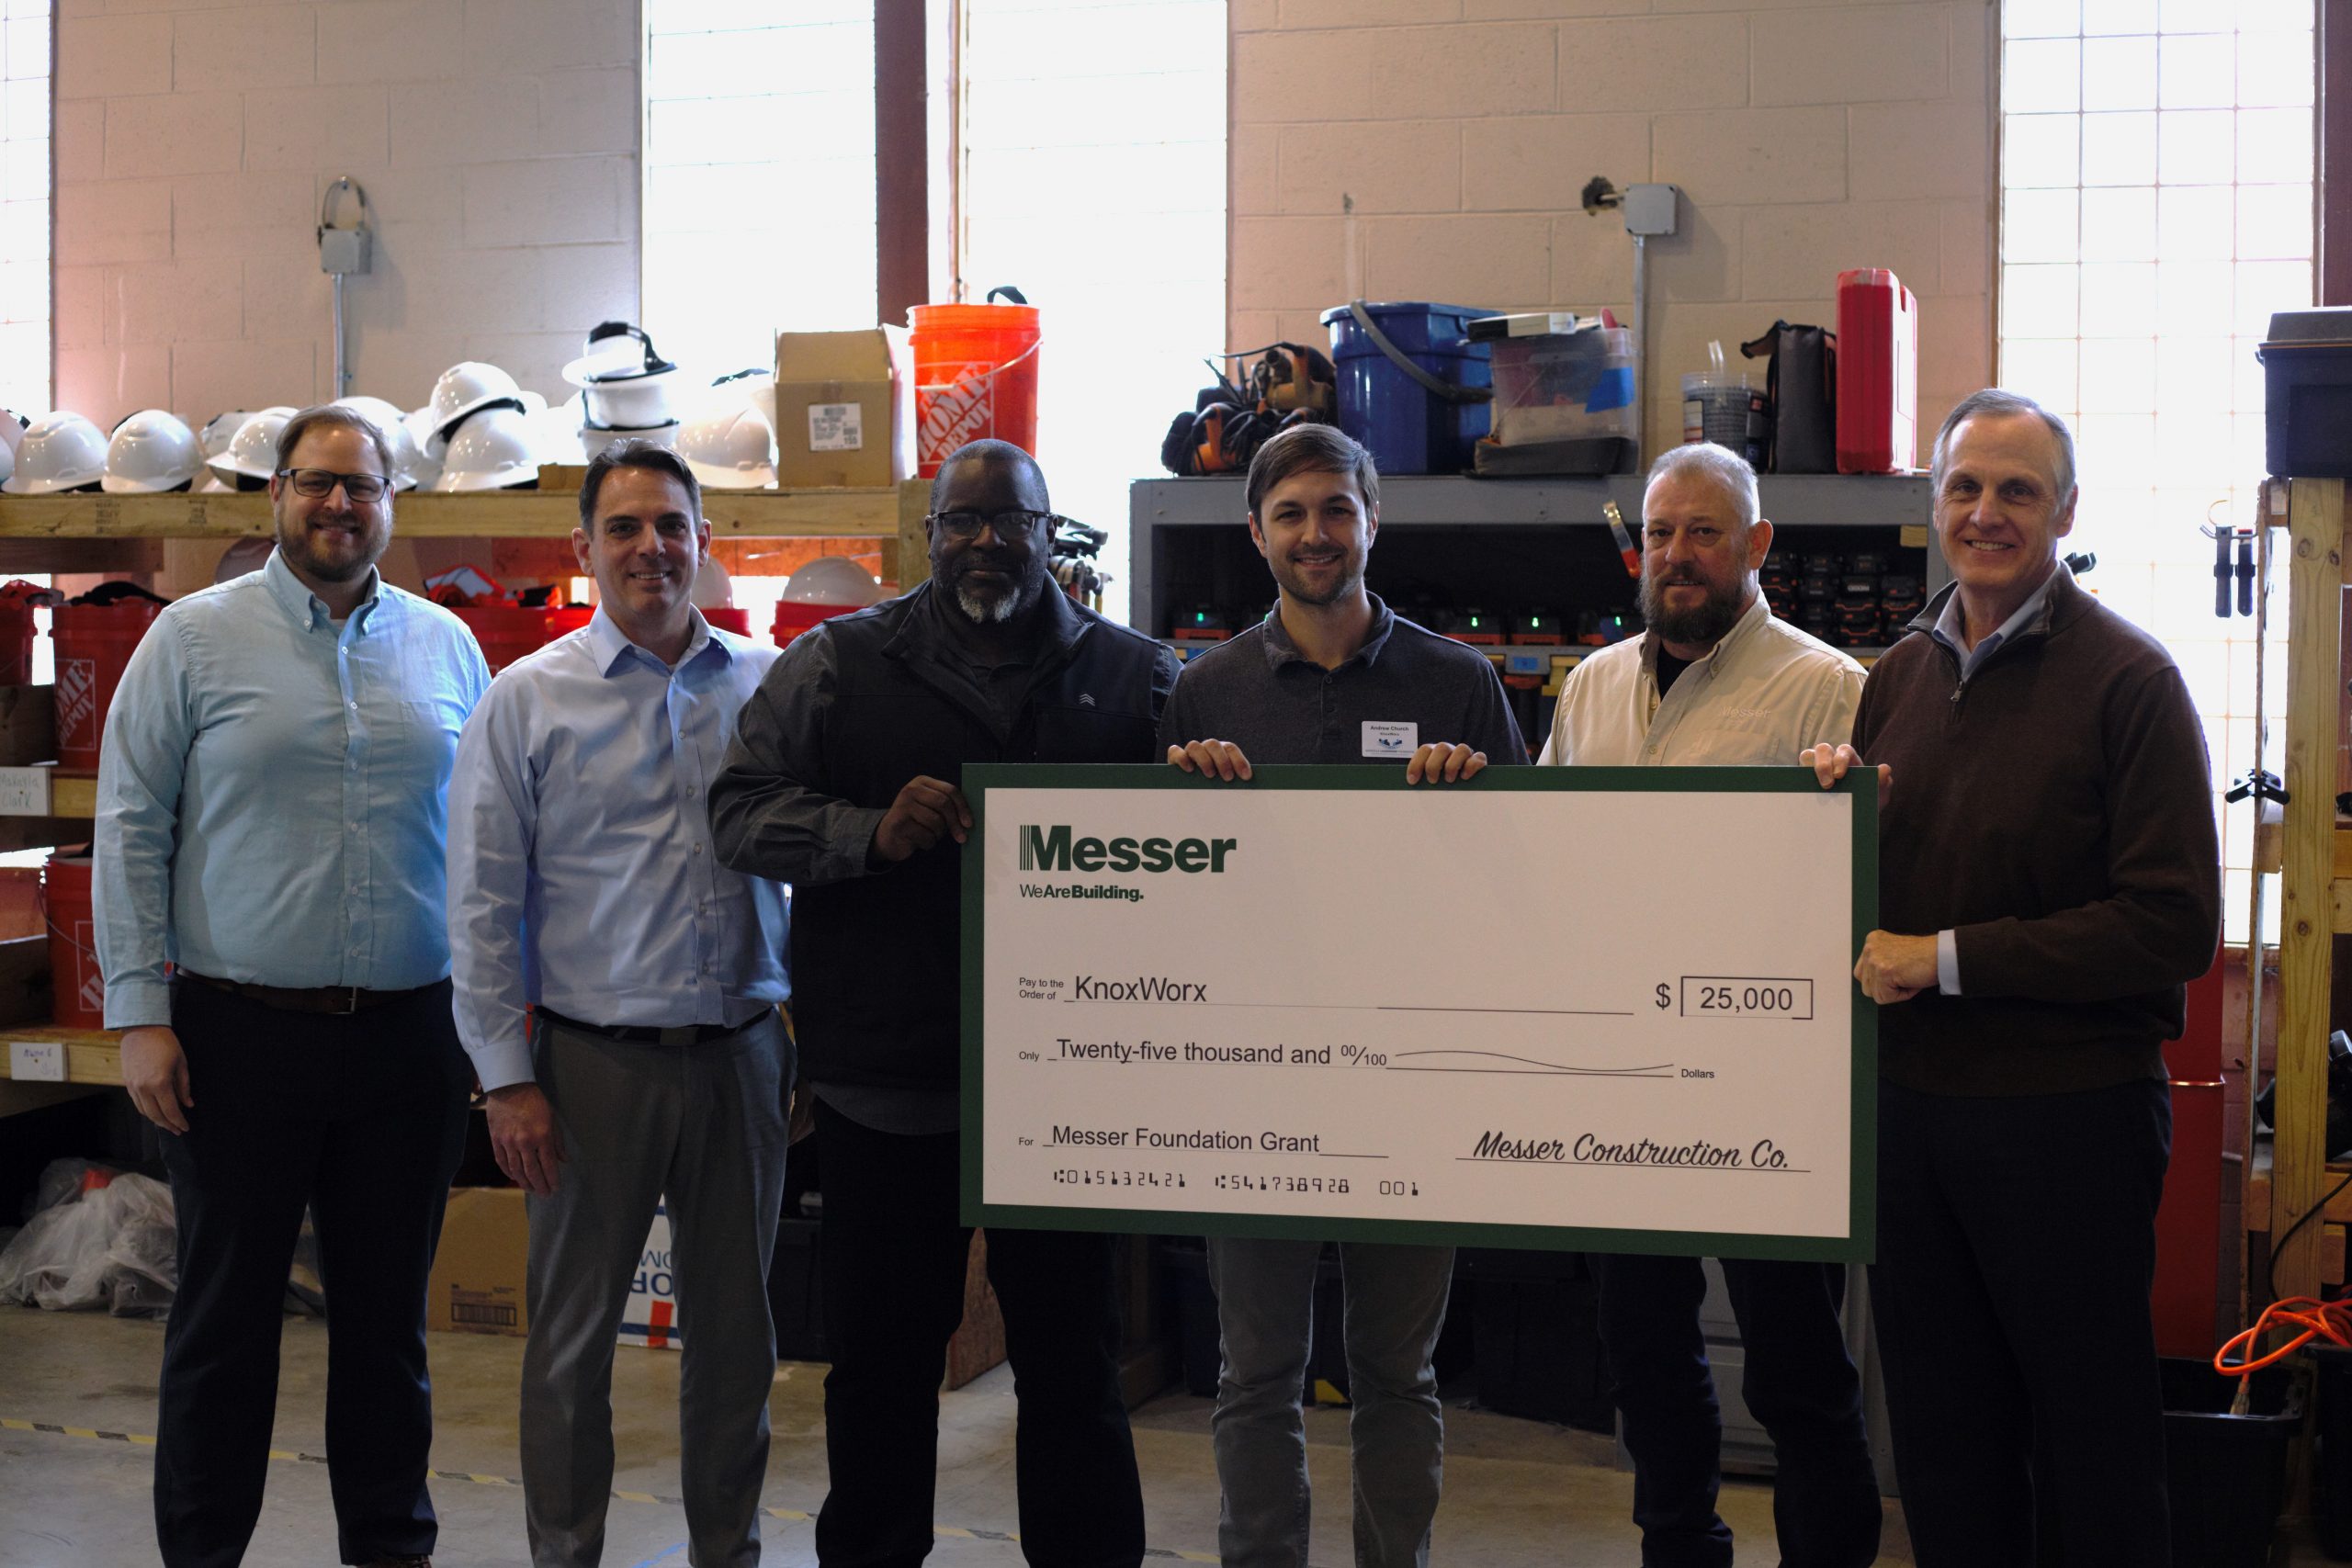 Messer Construction Company employees posing for the camera holding a large check